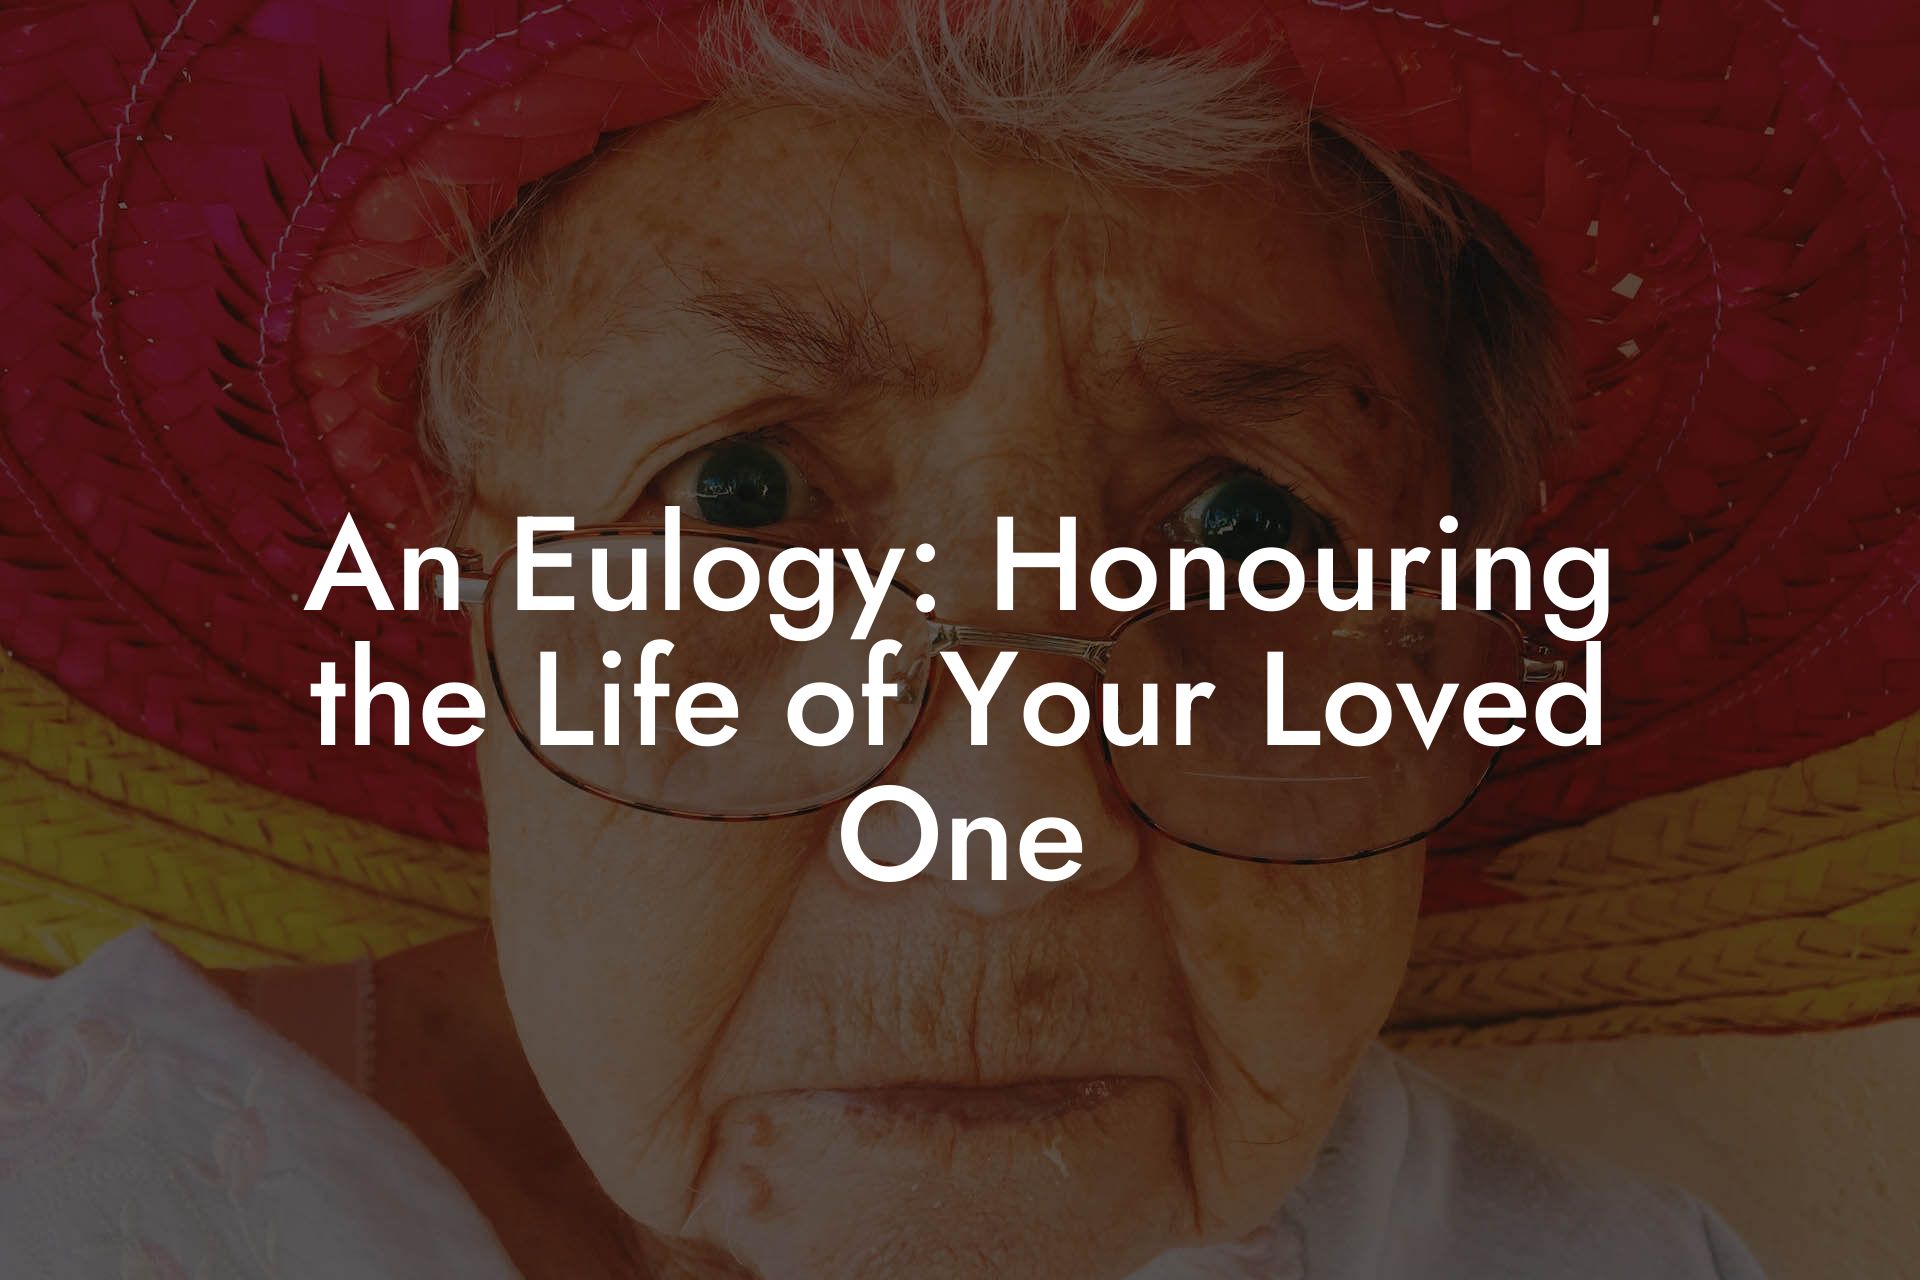 An Eulogy: Honouring the Life of Your Loved One